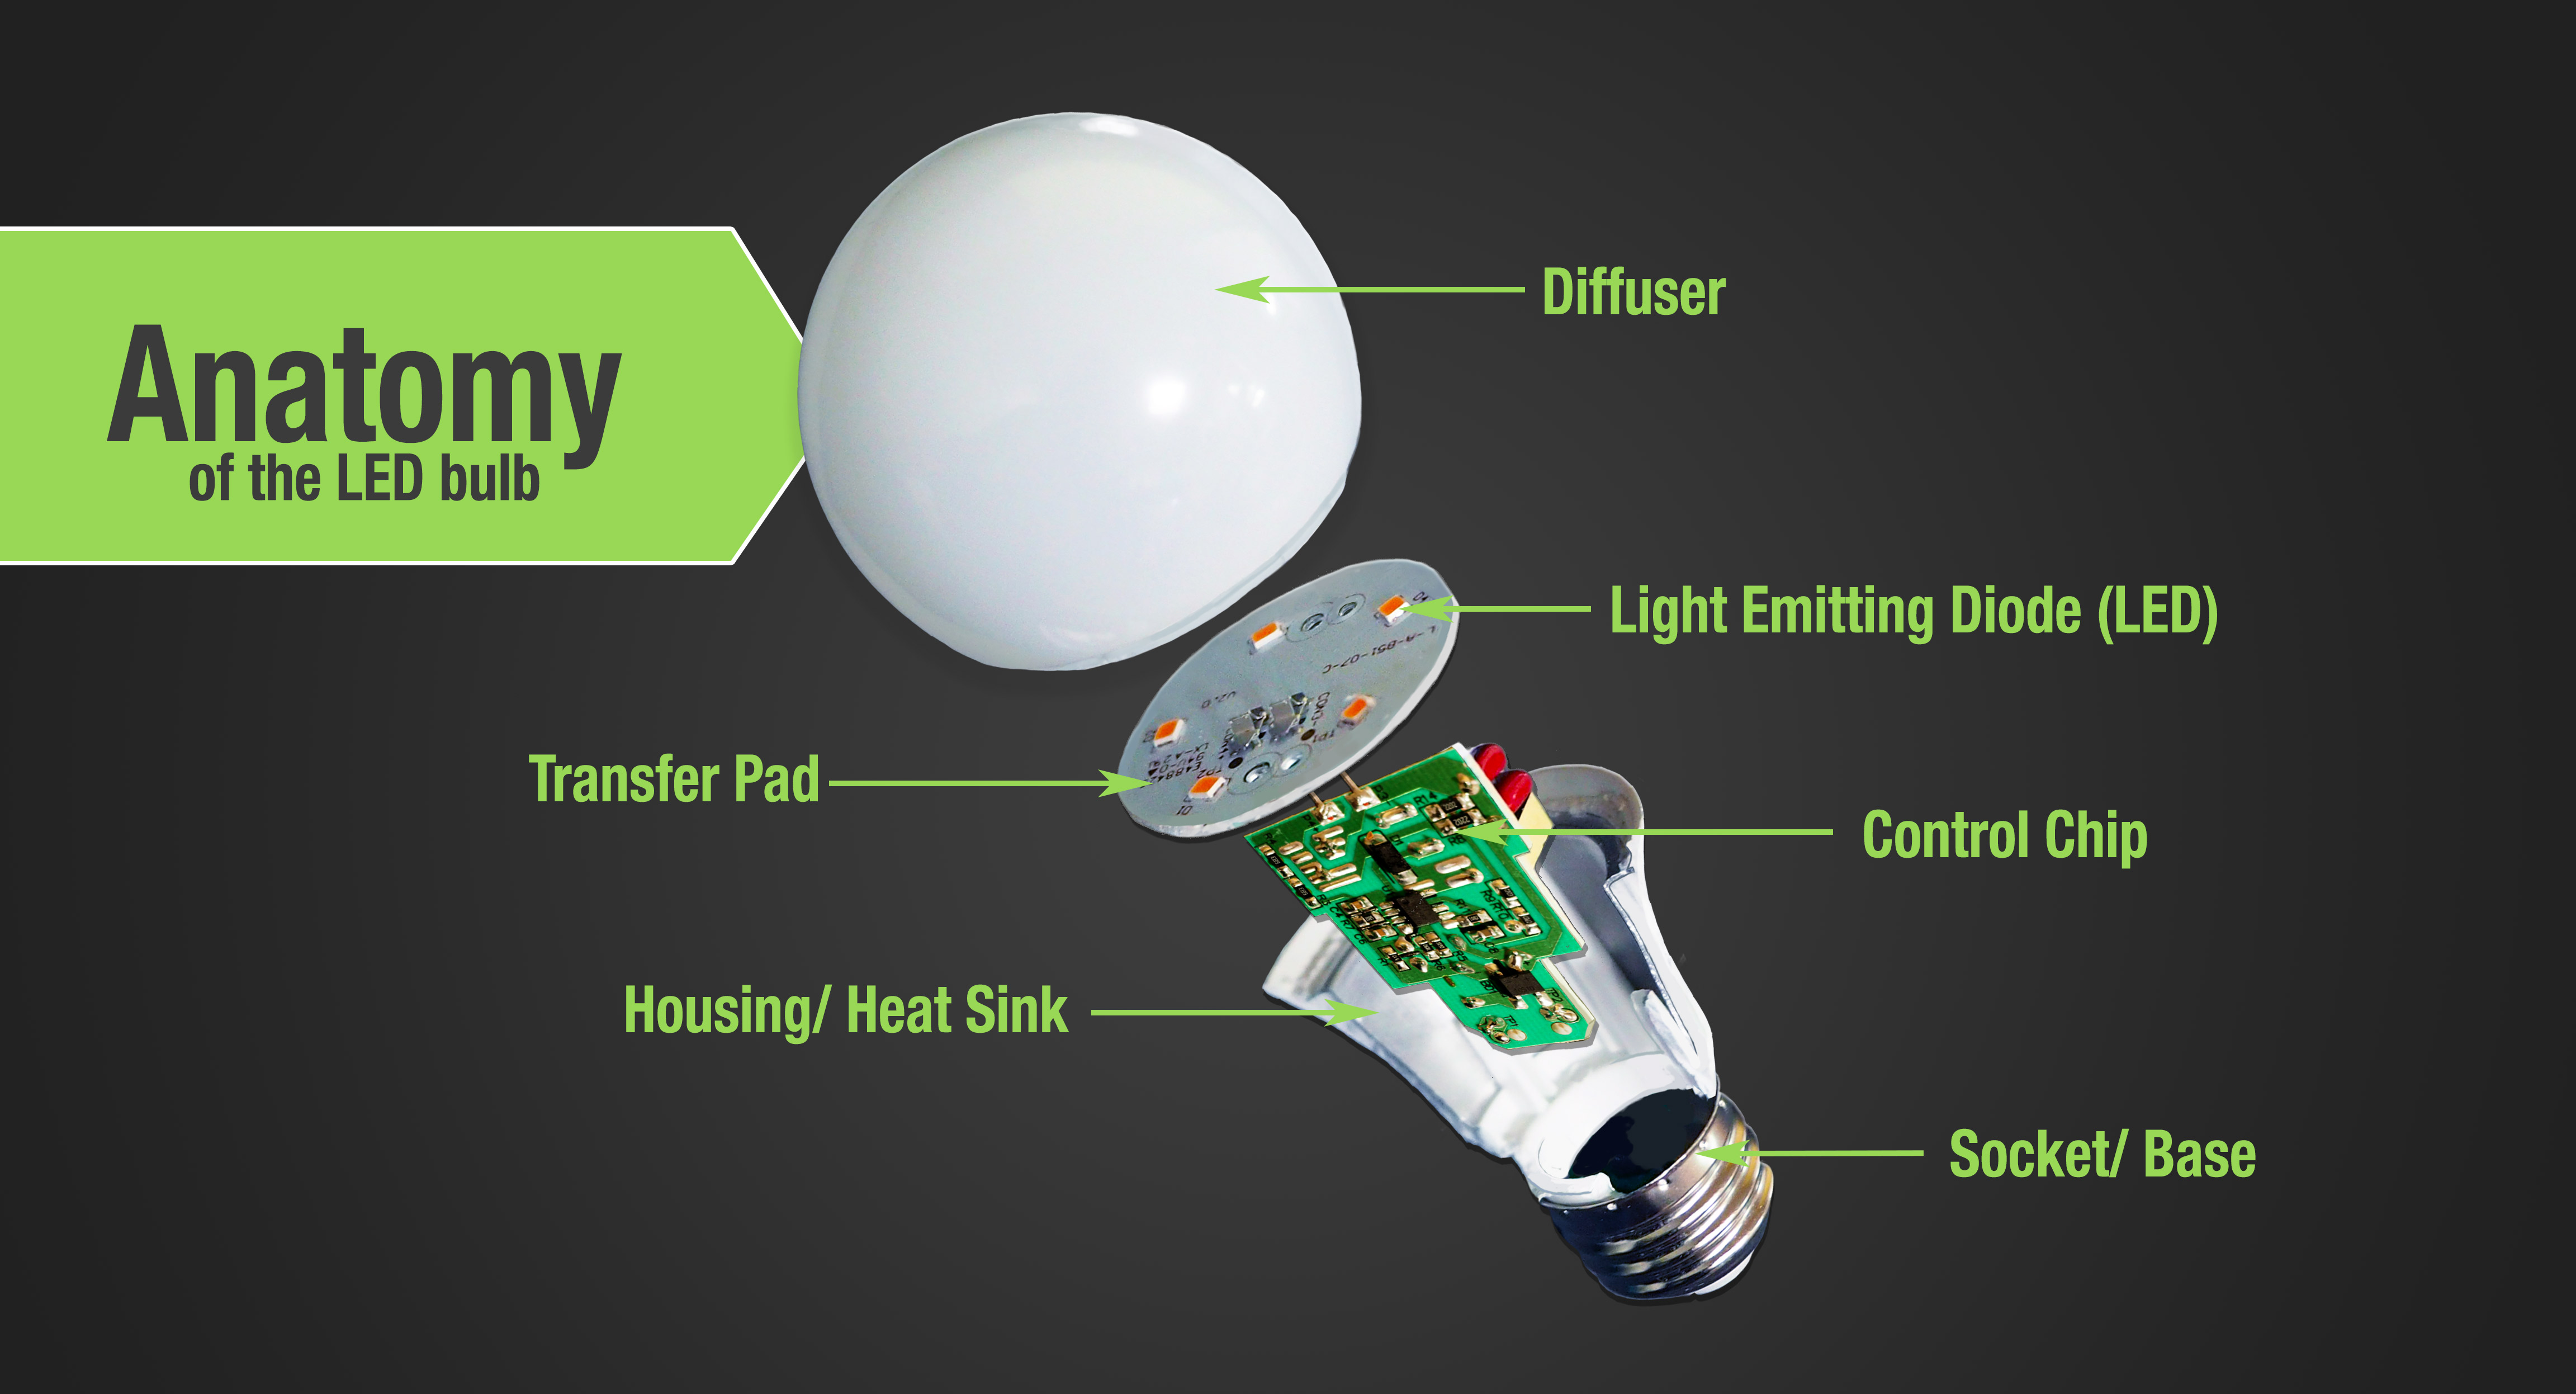 2019 LED Recycling Guide – NLR, Inc.